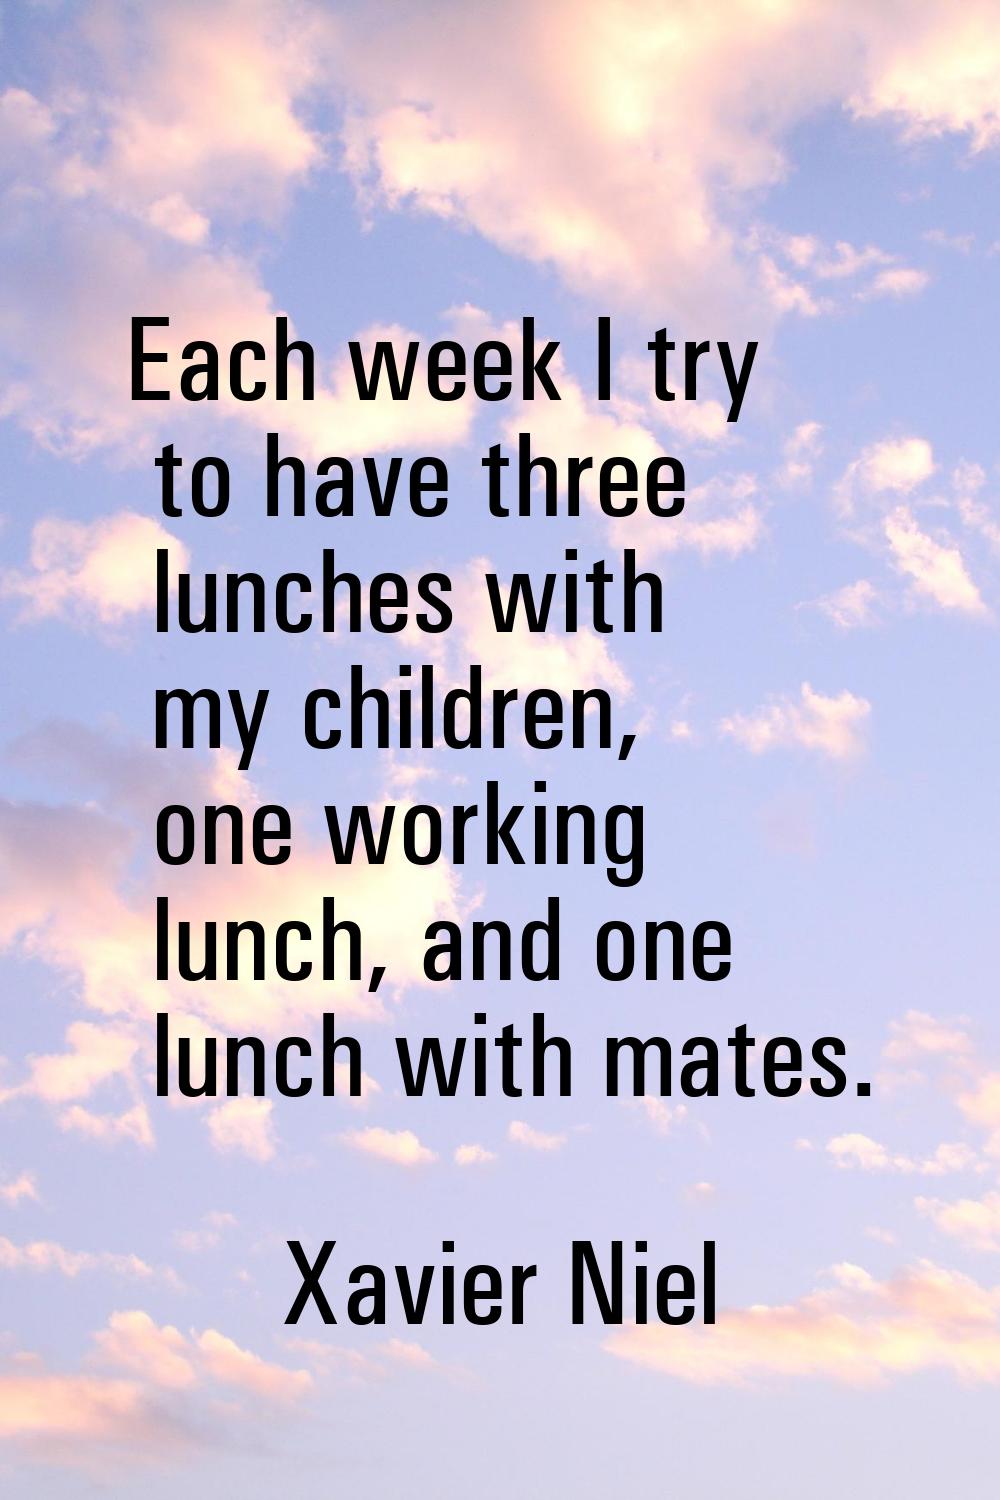 Each week I try to have three lunches with my children, one working lunch, and one lunch with mates